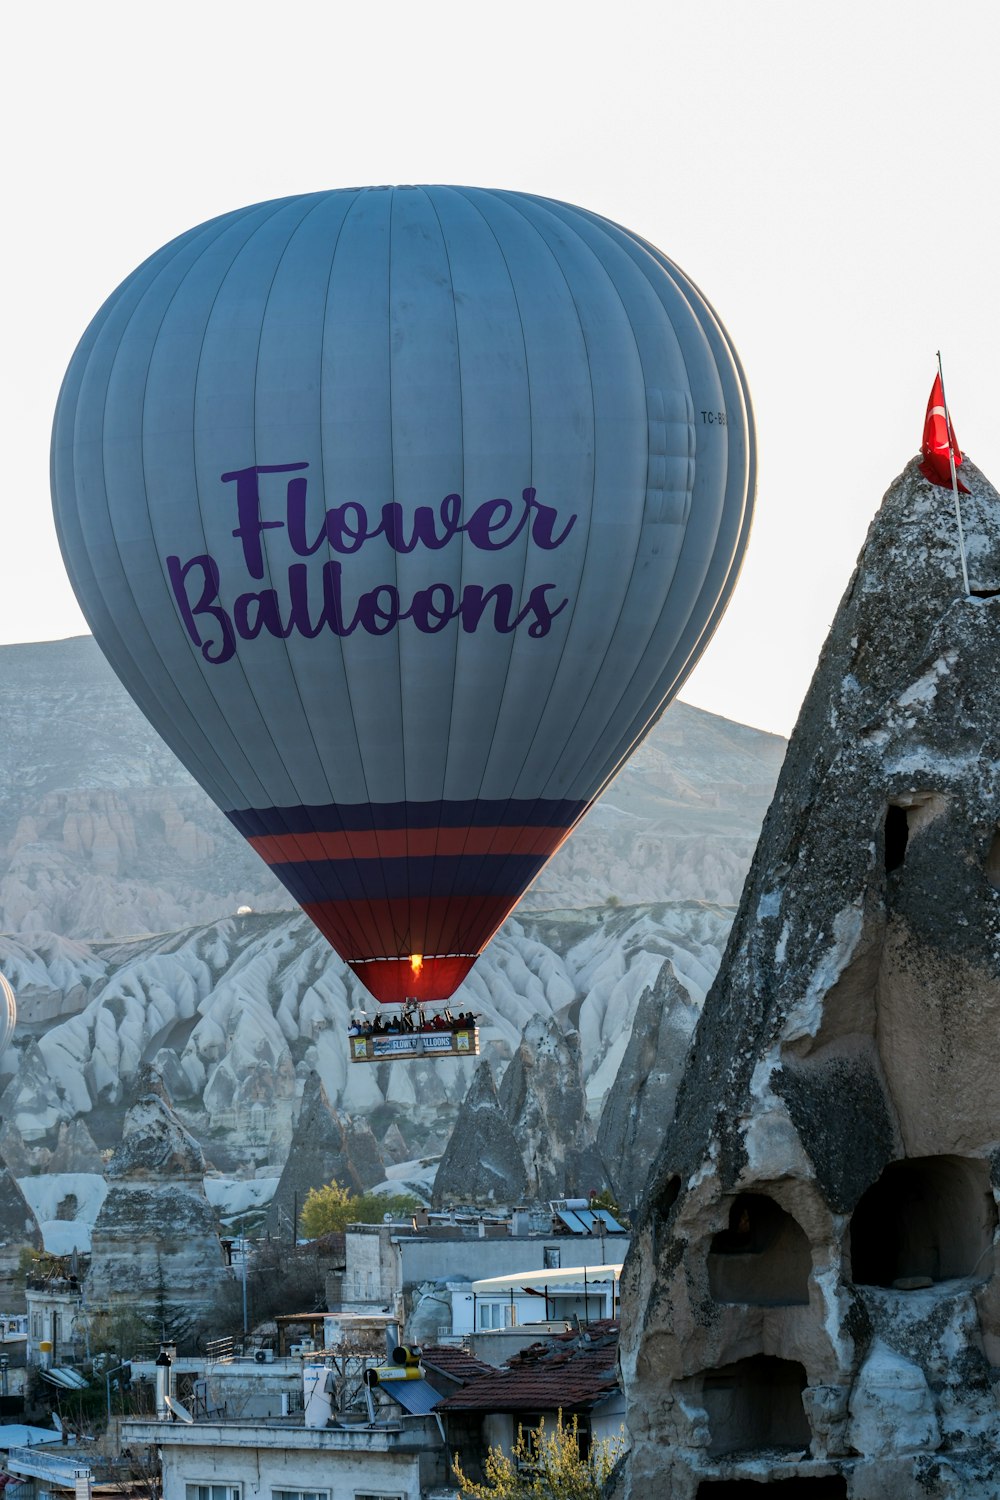 a hot air balloon with the word flower balloons written on it